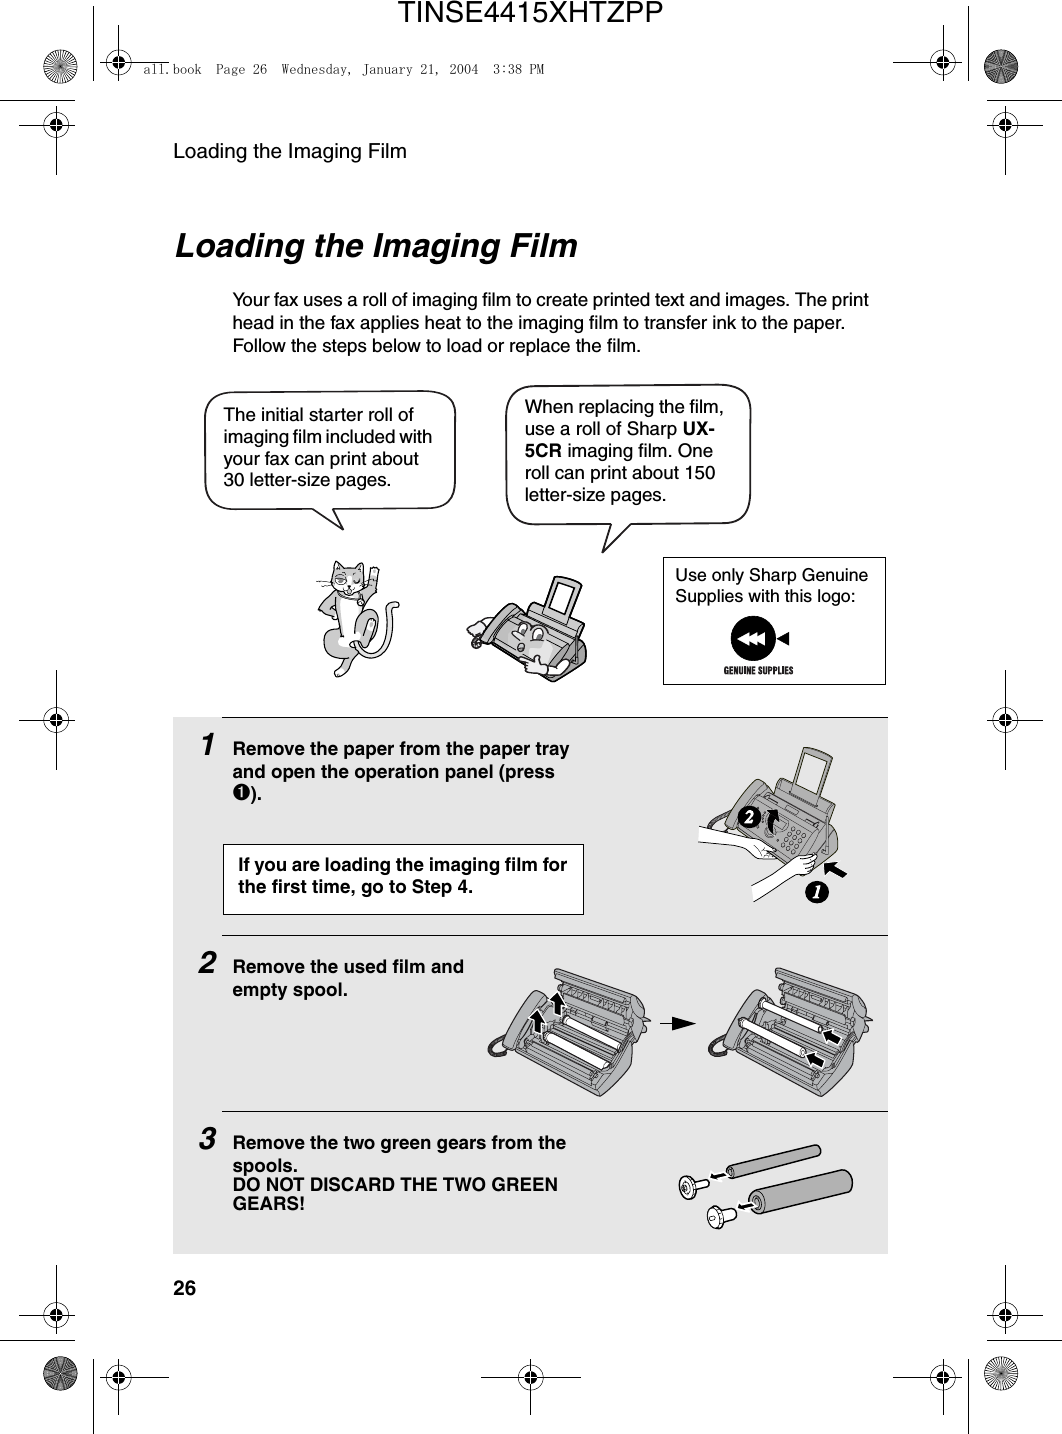 Loading the Imaging Film26Loading the Imaging FilmYour fax uses a roll of imaging film to create printed text and images. The print head in the fax applies heat to the imaging film to transfer ink to the paper. Follow the steps below to load or replace the film.1Remove the paper from the paper tray and open the operation panel (press ➊).2Remove the used film andempty spool.3Remove the two green gears from the spools. DO NOT DISCARD THE TWO GREEN GEARS!12When replacing the film, use a roll of Sharp UX-5CR imaging film. One roll can print about 150 letter-size pages.The initial starter roll of imaging film included with your fax can print about 30 letter-size pages. If you are loading the imaging film for the first time, go to Step 4.Use only Sharp Genuine Supplies with this logo:all.book  Page 26  Wednesday, January 21, 2004  3:38 PMTINSE4415XHTZPP